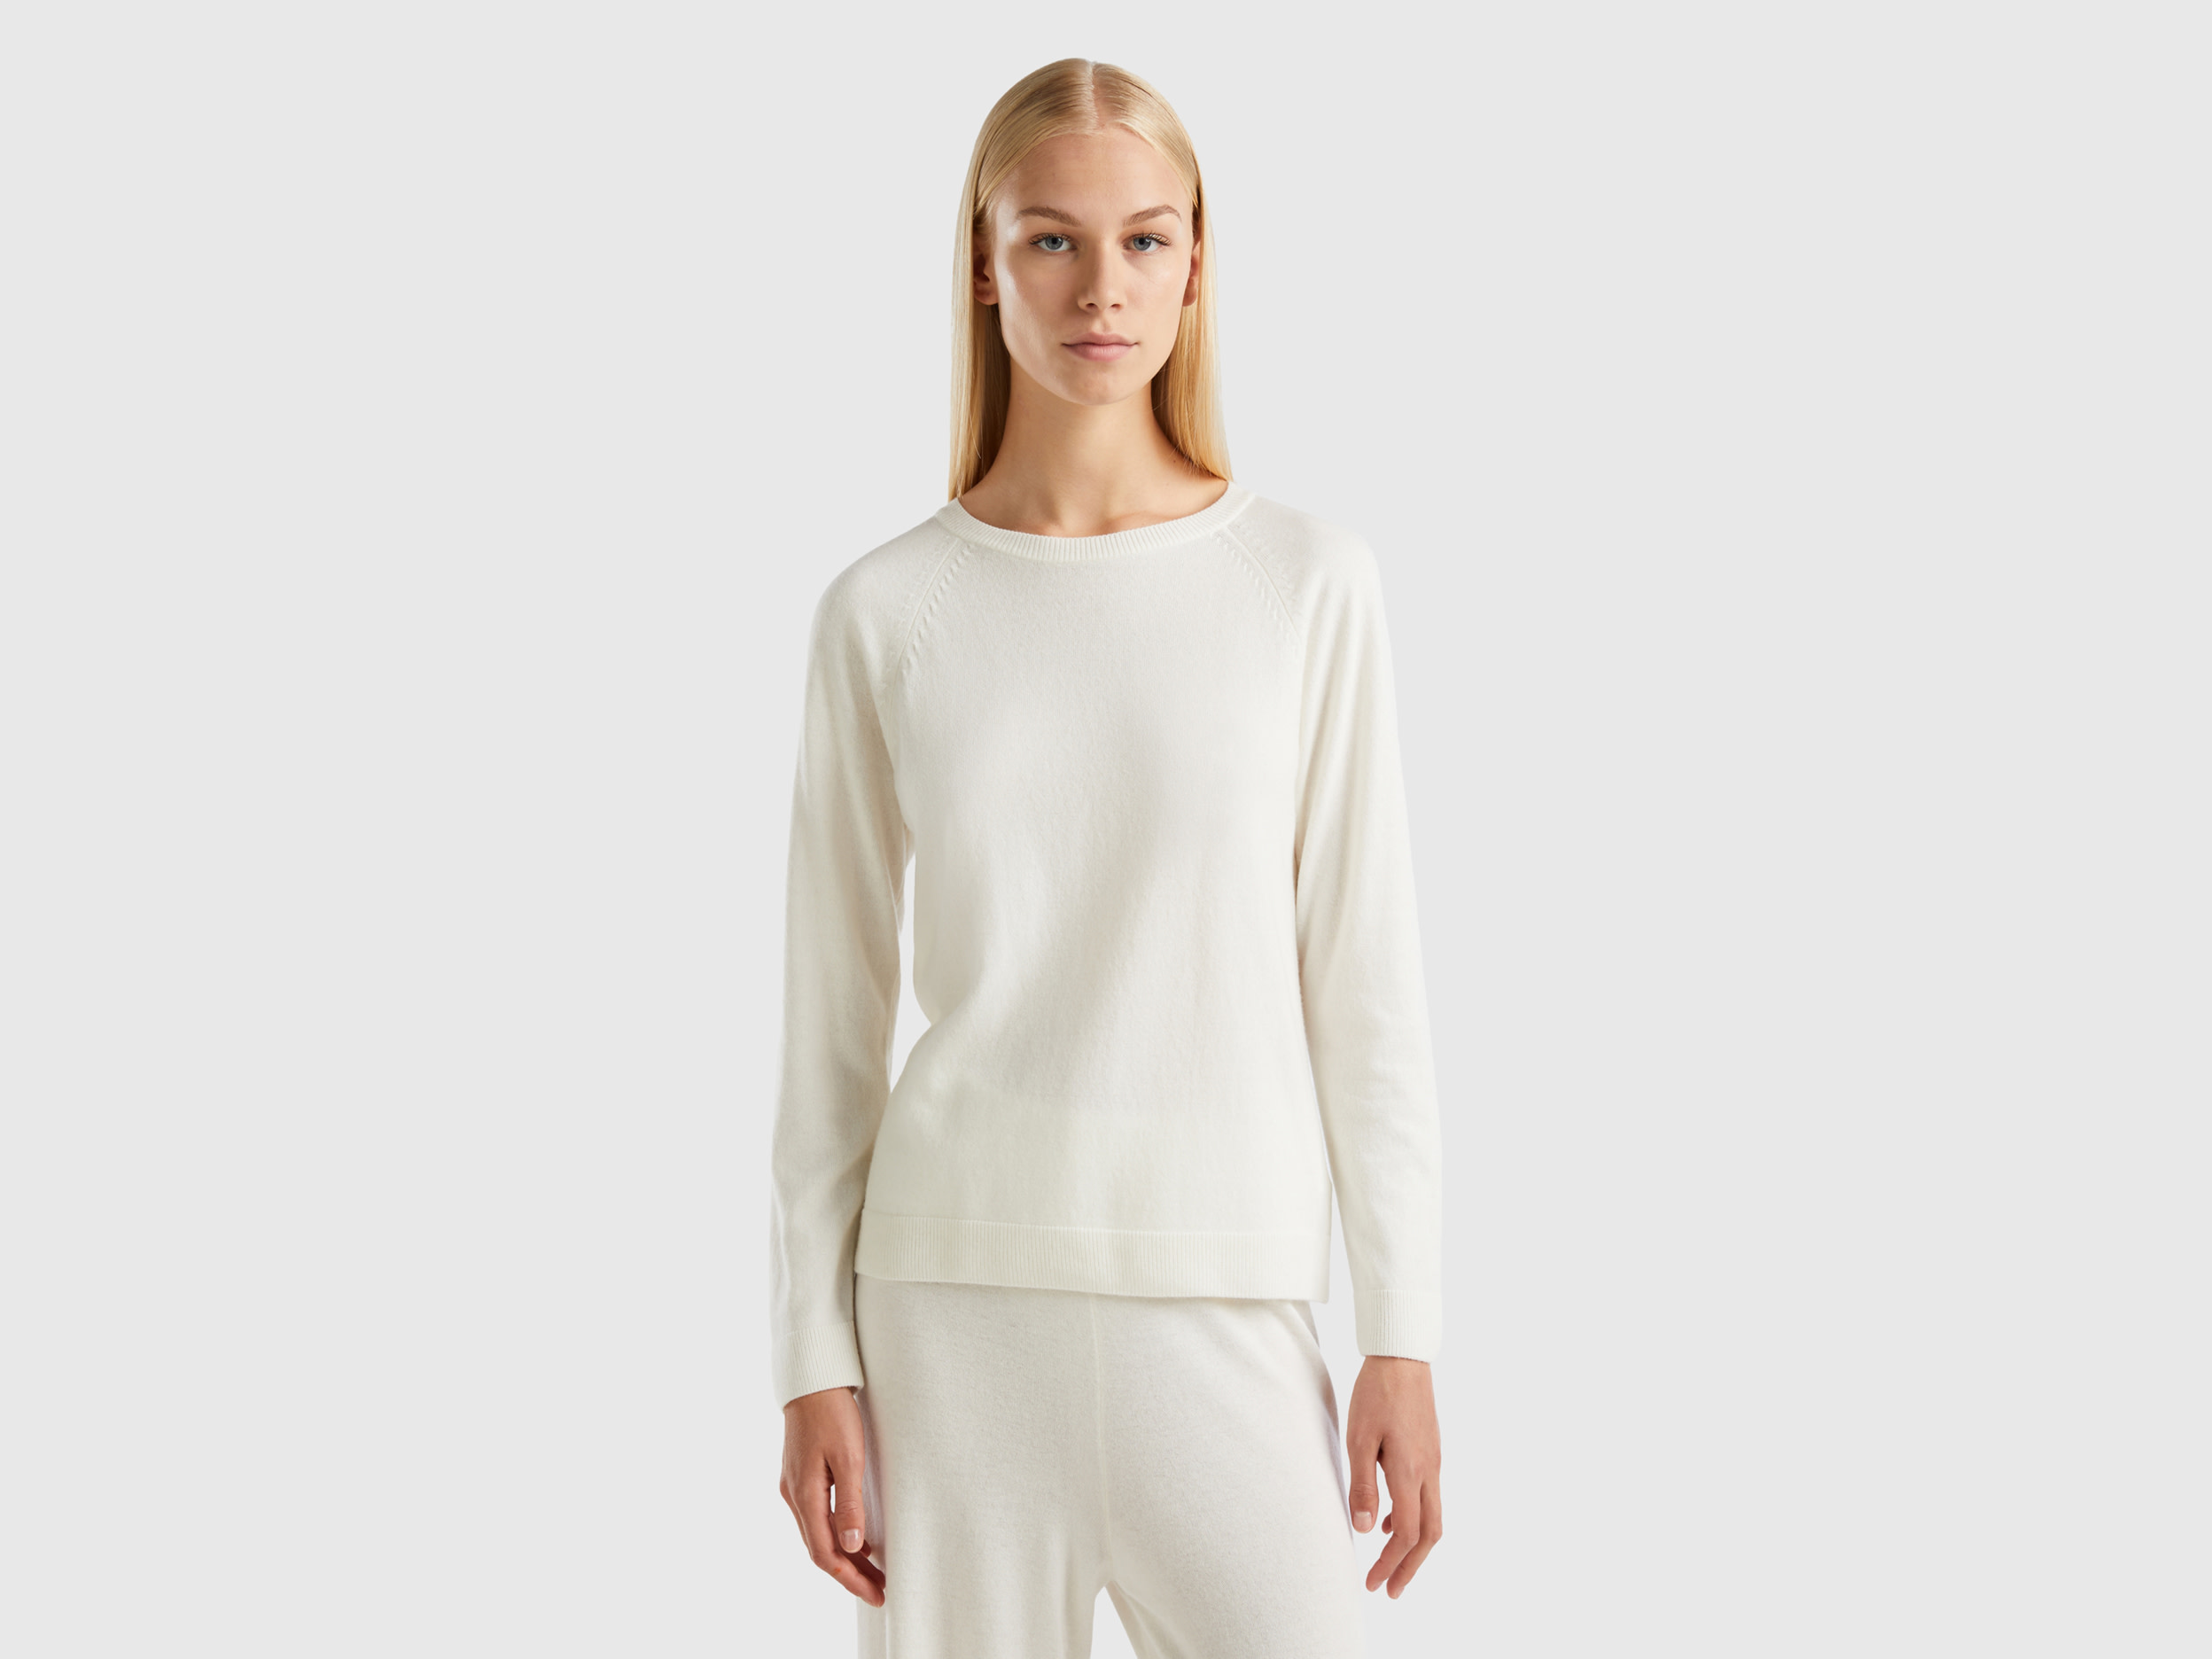 Benetton, Cream Crew Neck Sweater In Cashmere And Wool Blend, size XS, Creamy White, Women